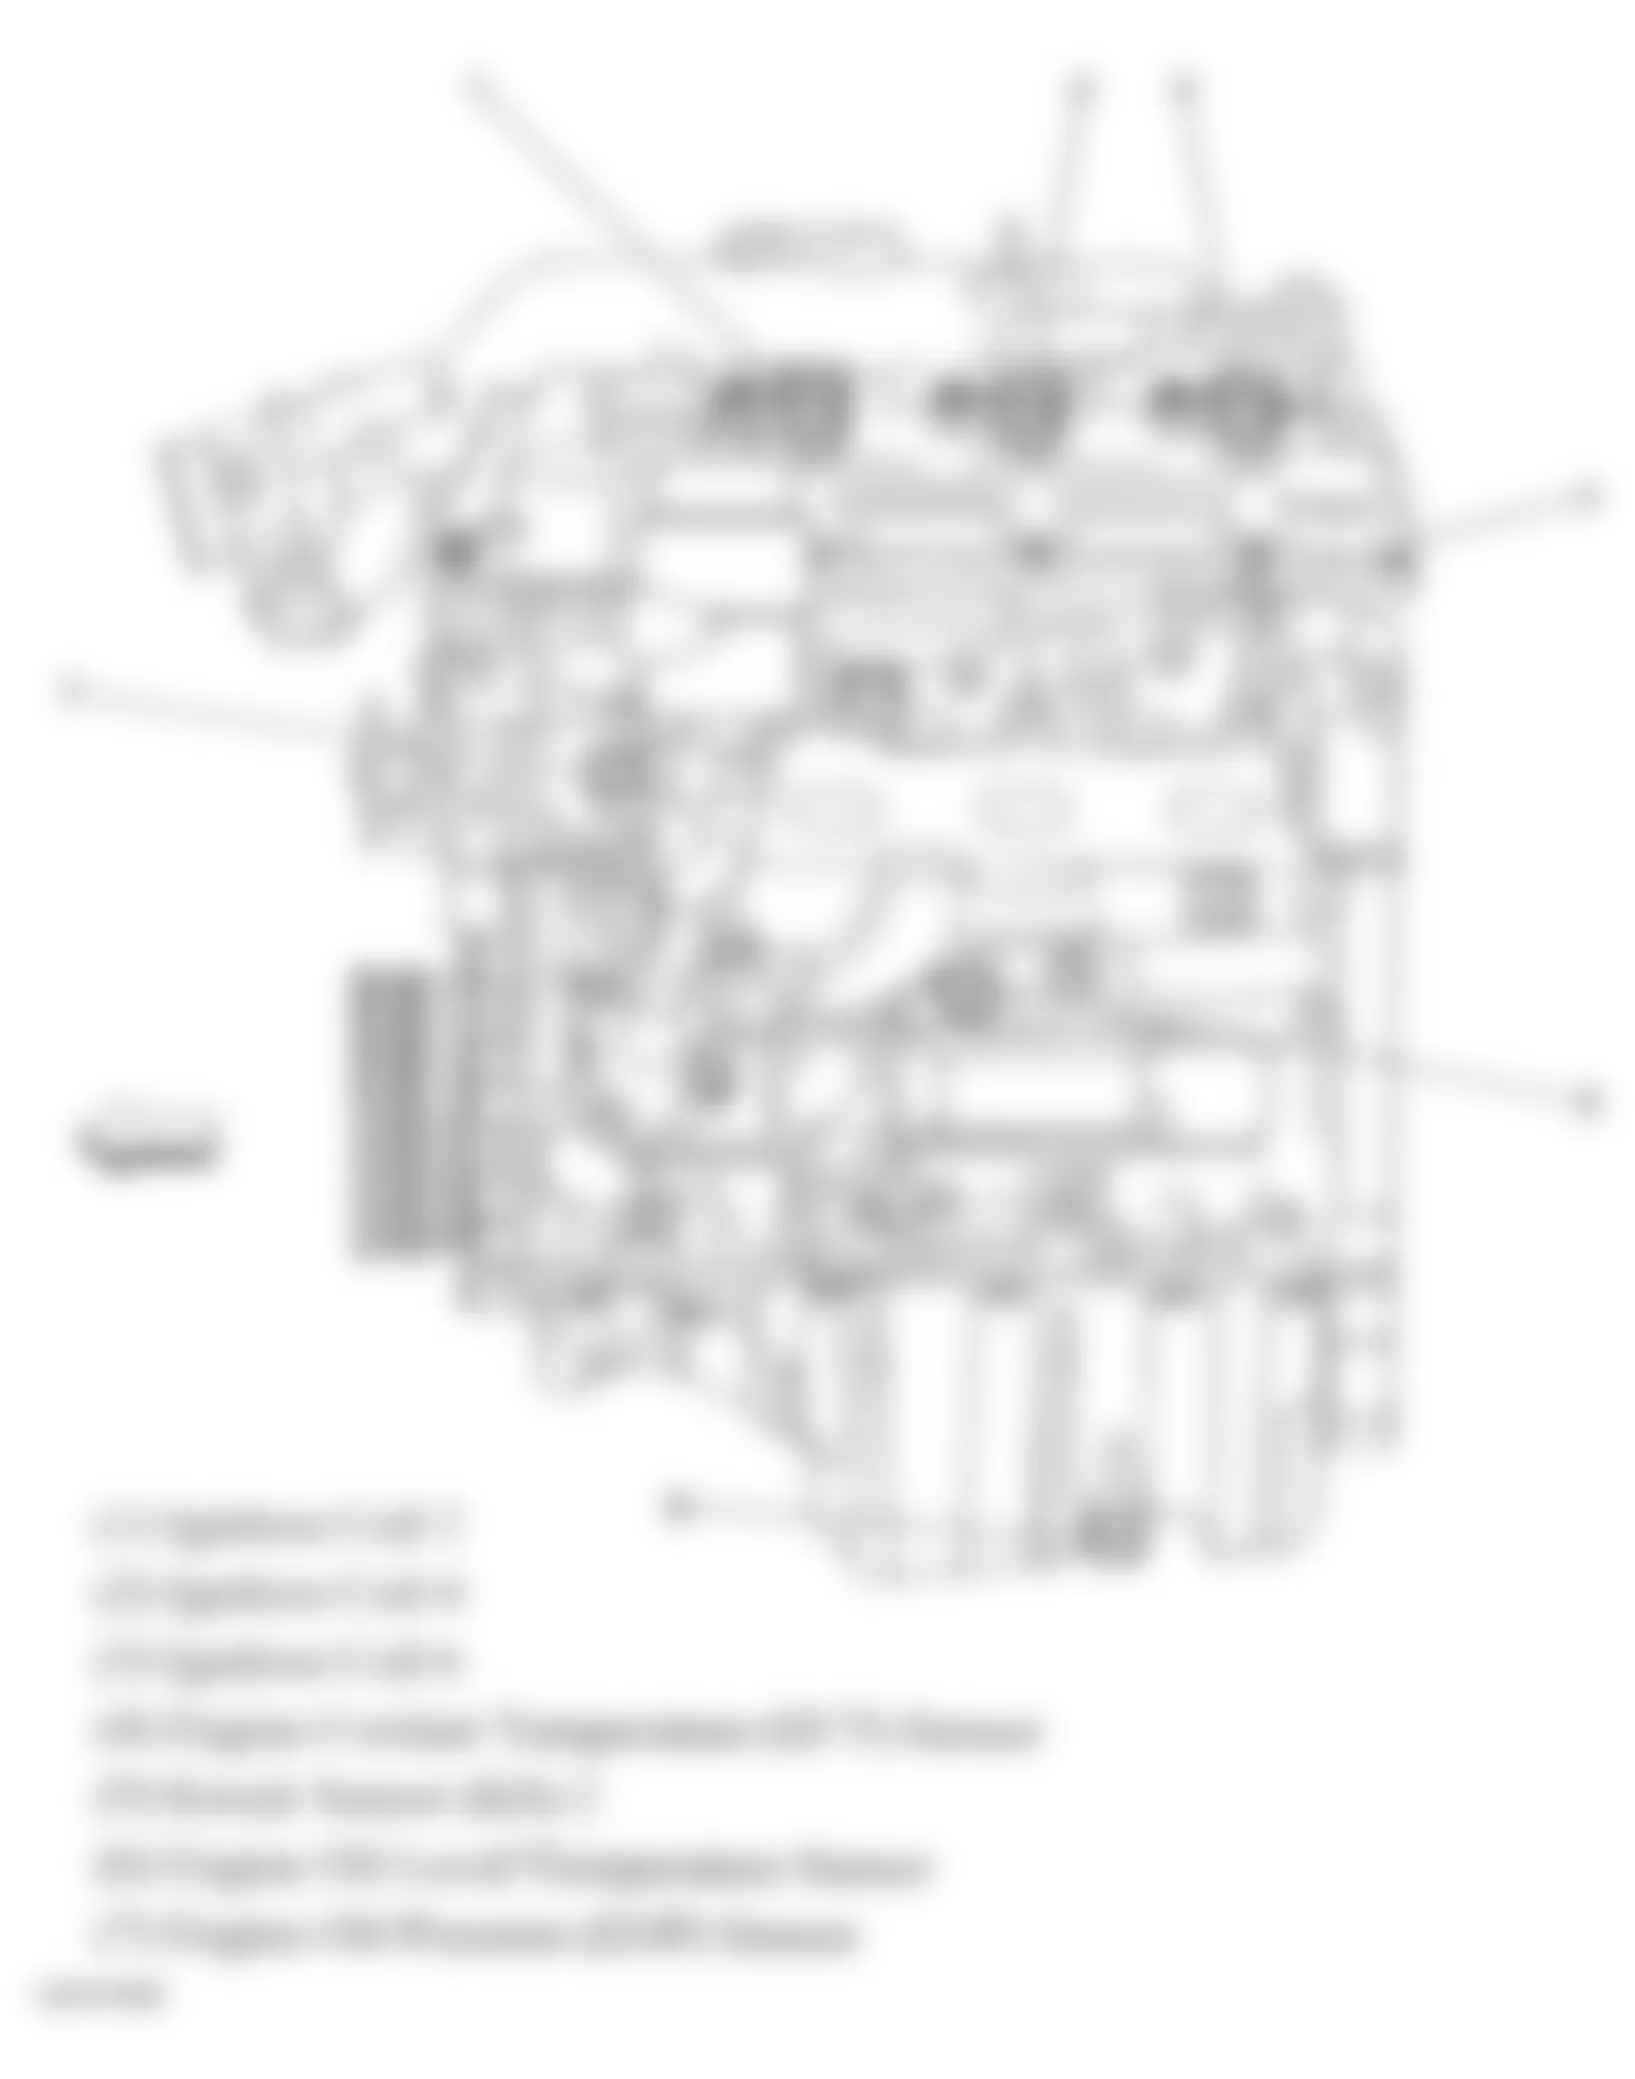 Buick Allure CXS 2008 - Component Locations -  Left Side Of Engine (3.6L)